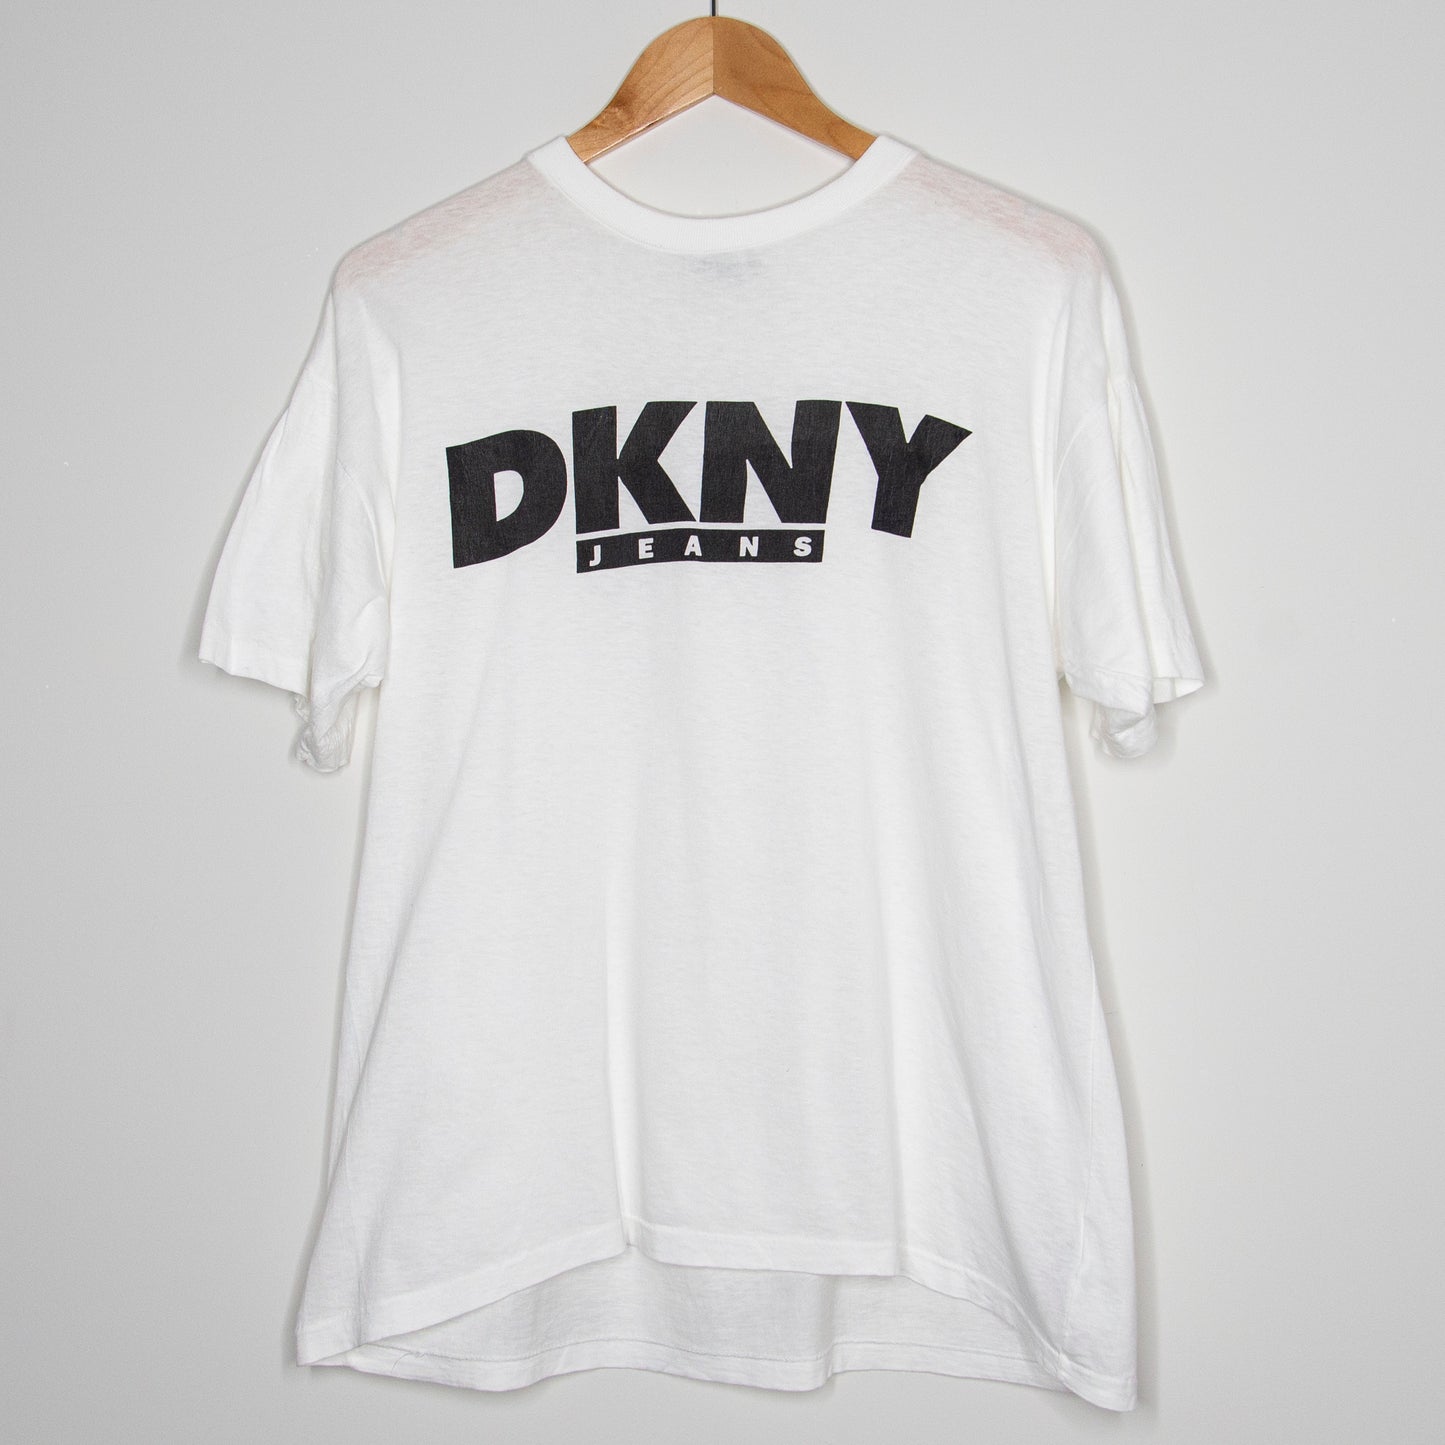 90's DKNY Jeans T-Shirt Small